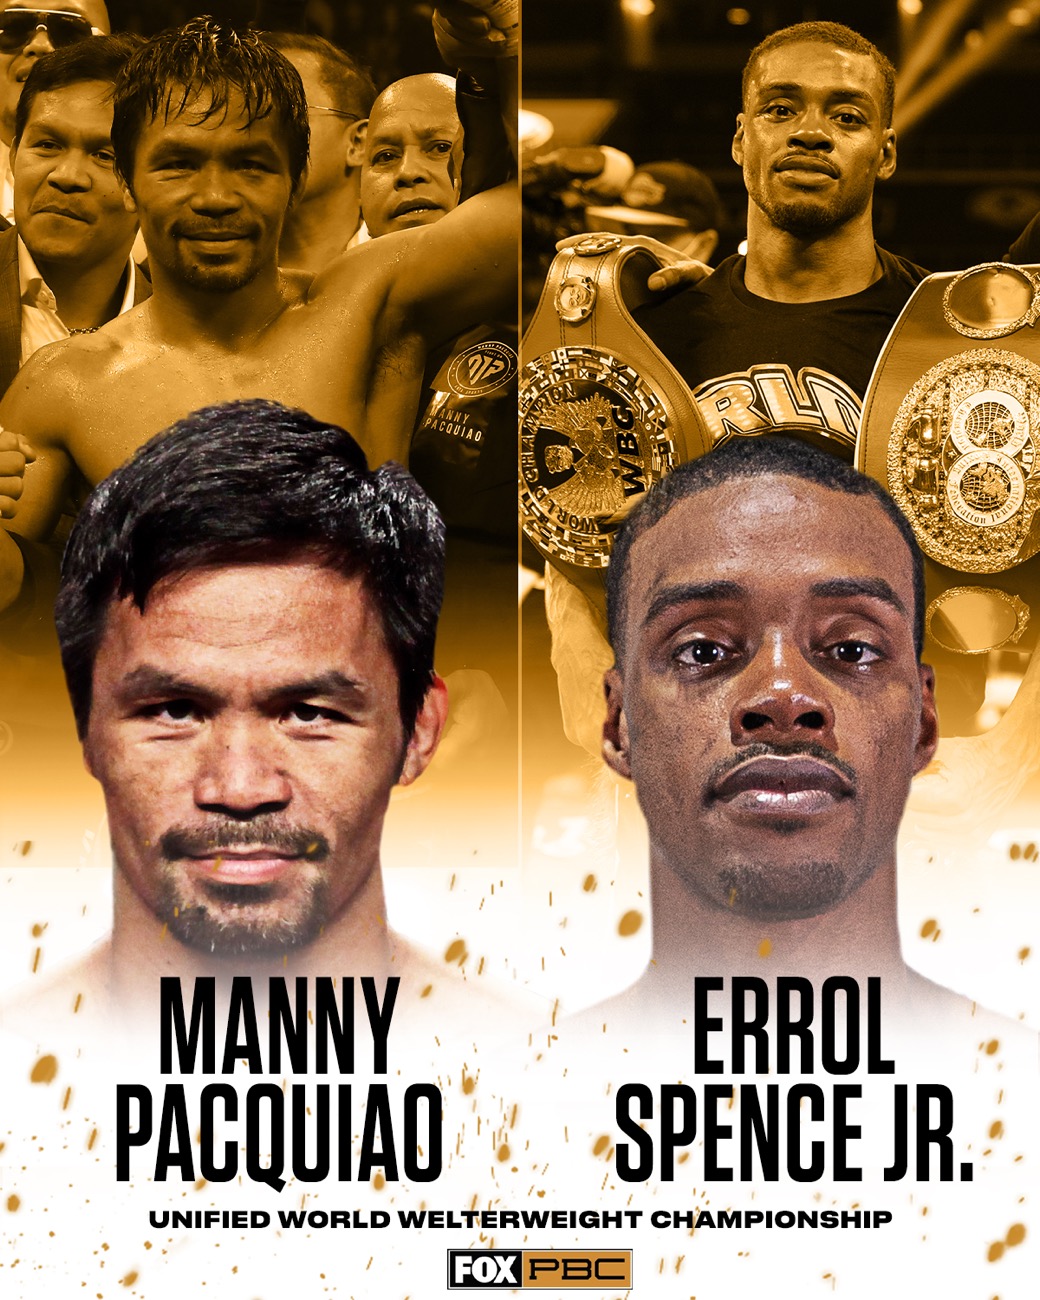 Pacquiao, Spence Jr topping headliner pay-per-view event on August 21